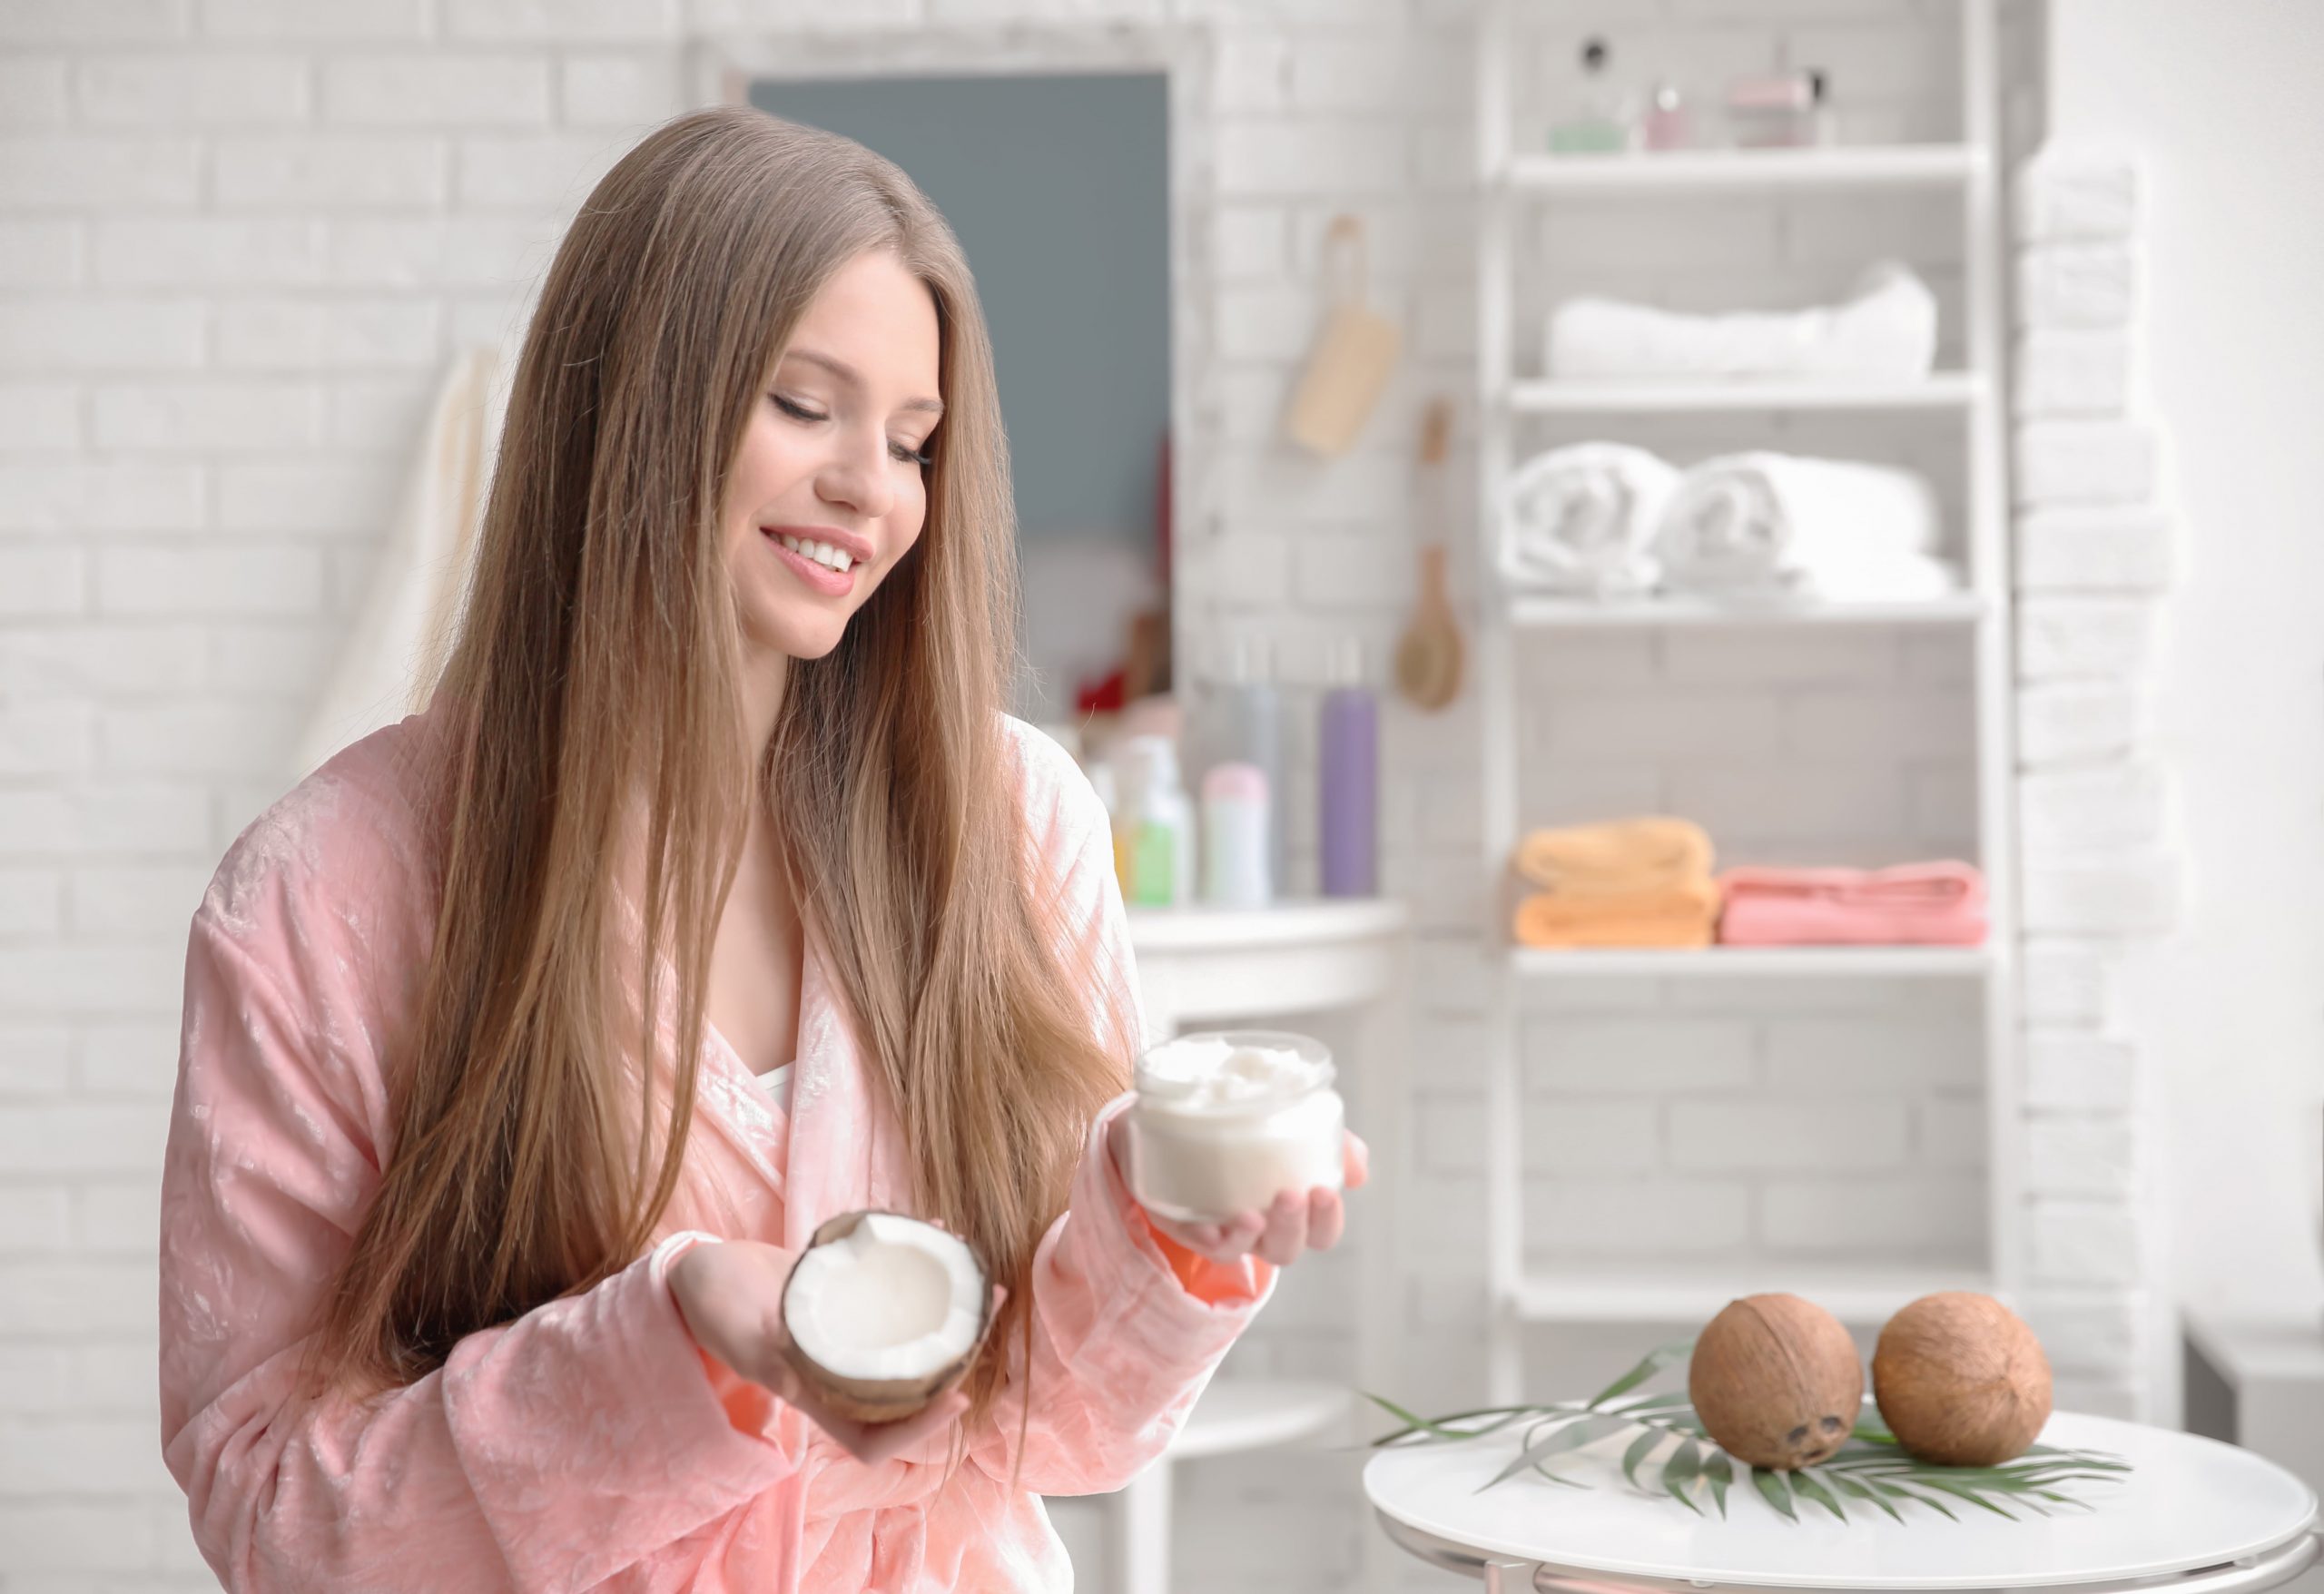 COCONUT OIL FOR YOUR HAIR GROWTH-wallpaper